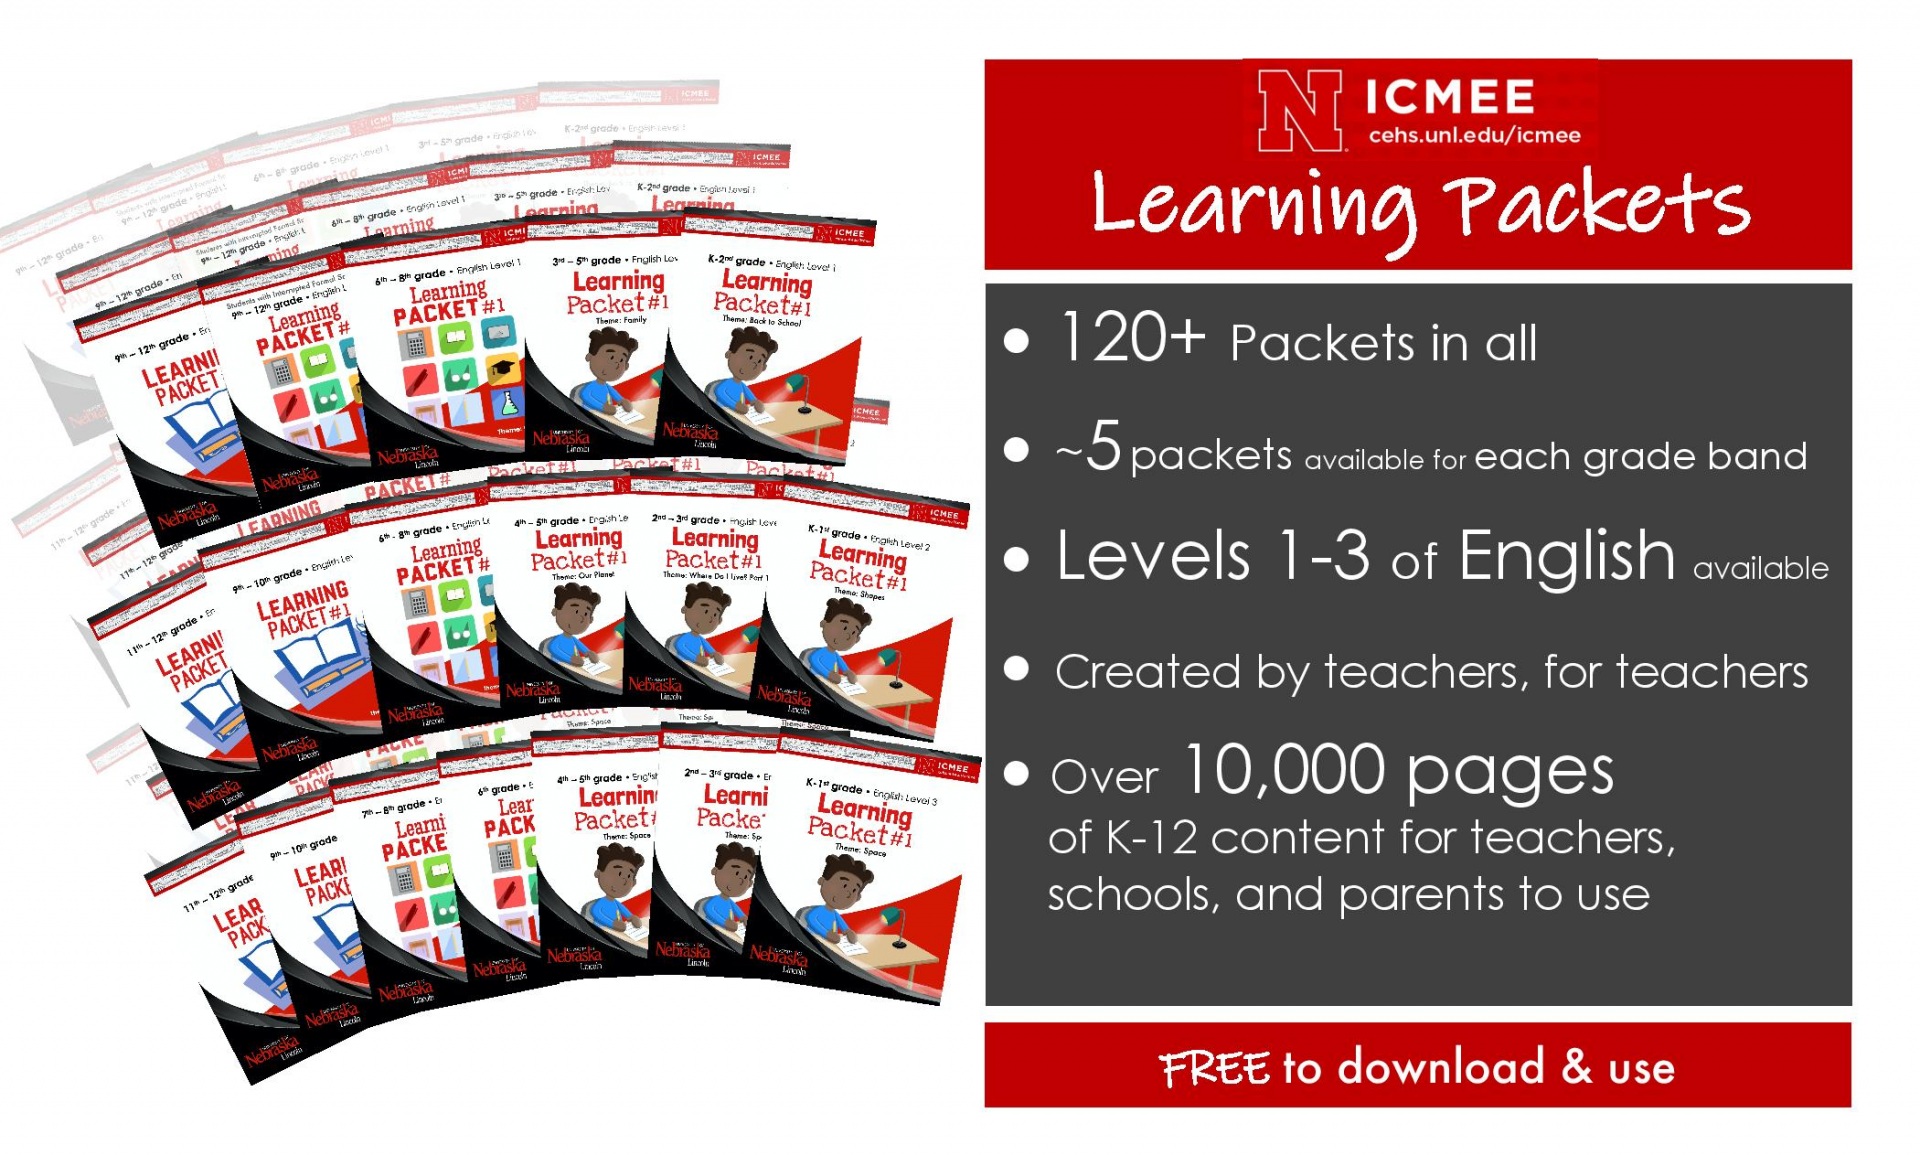 ICMEE Learning Packets